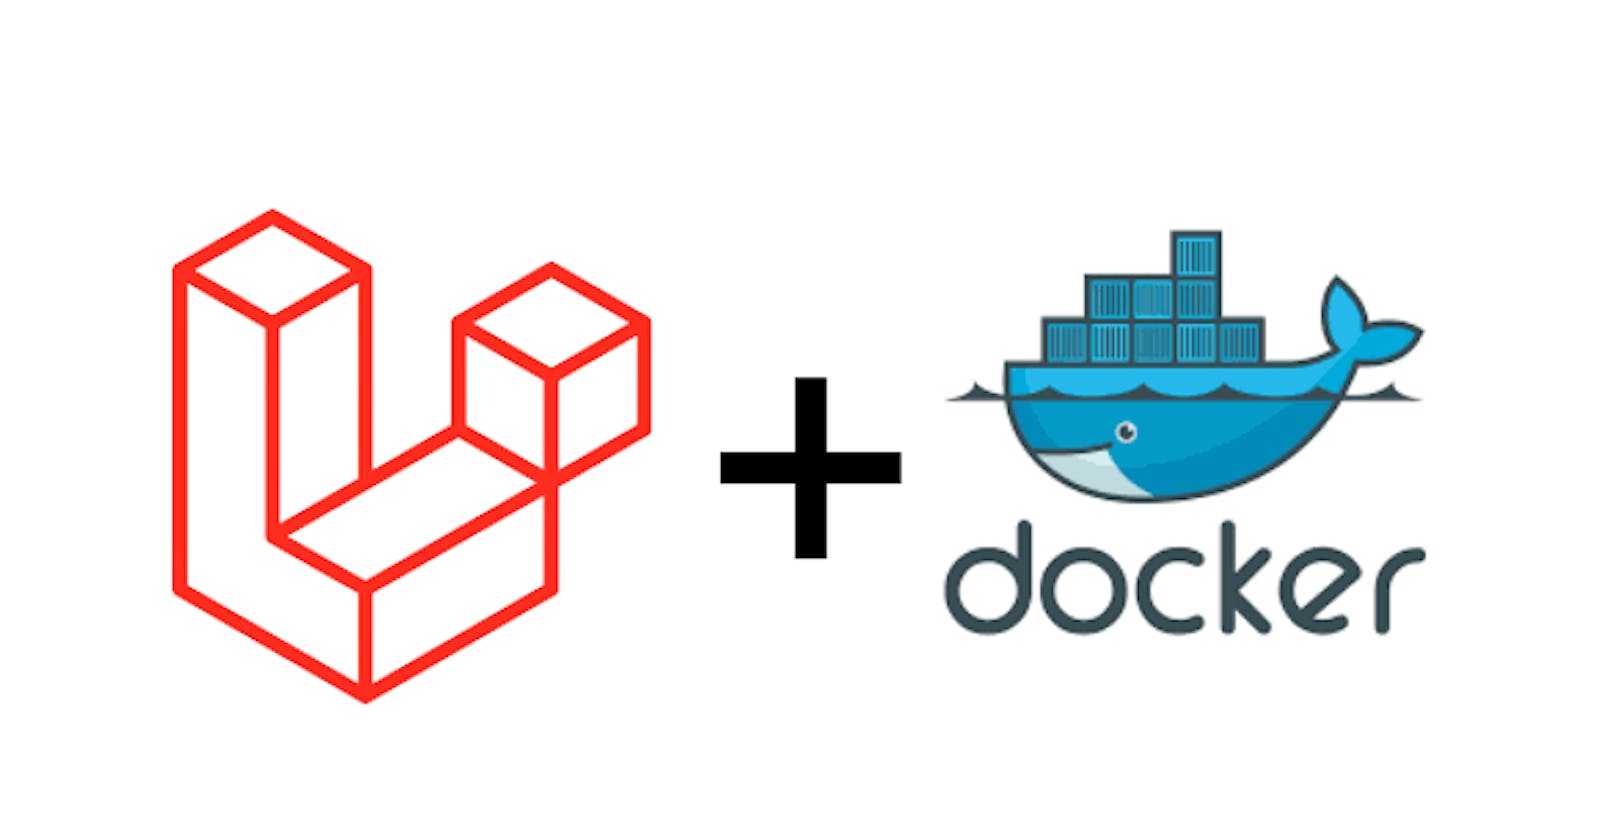 How to run Laravel application and connect other services (MySql) using Docker.